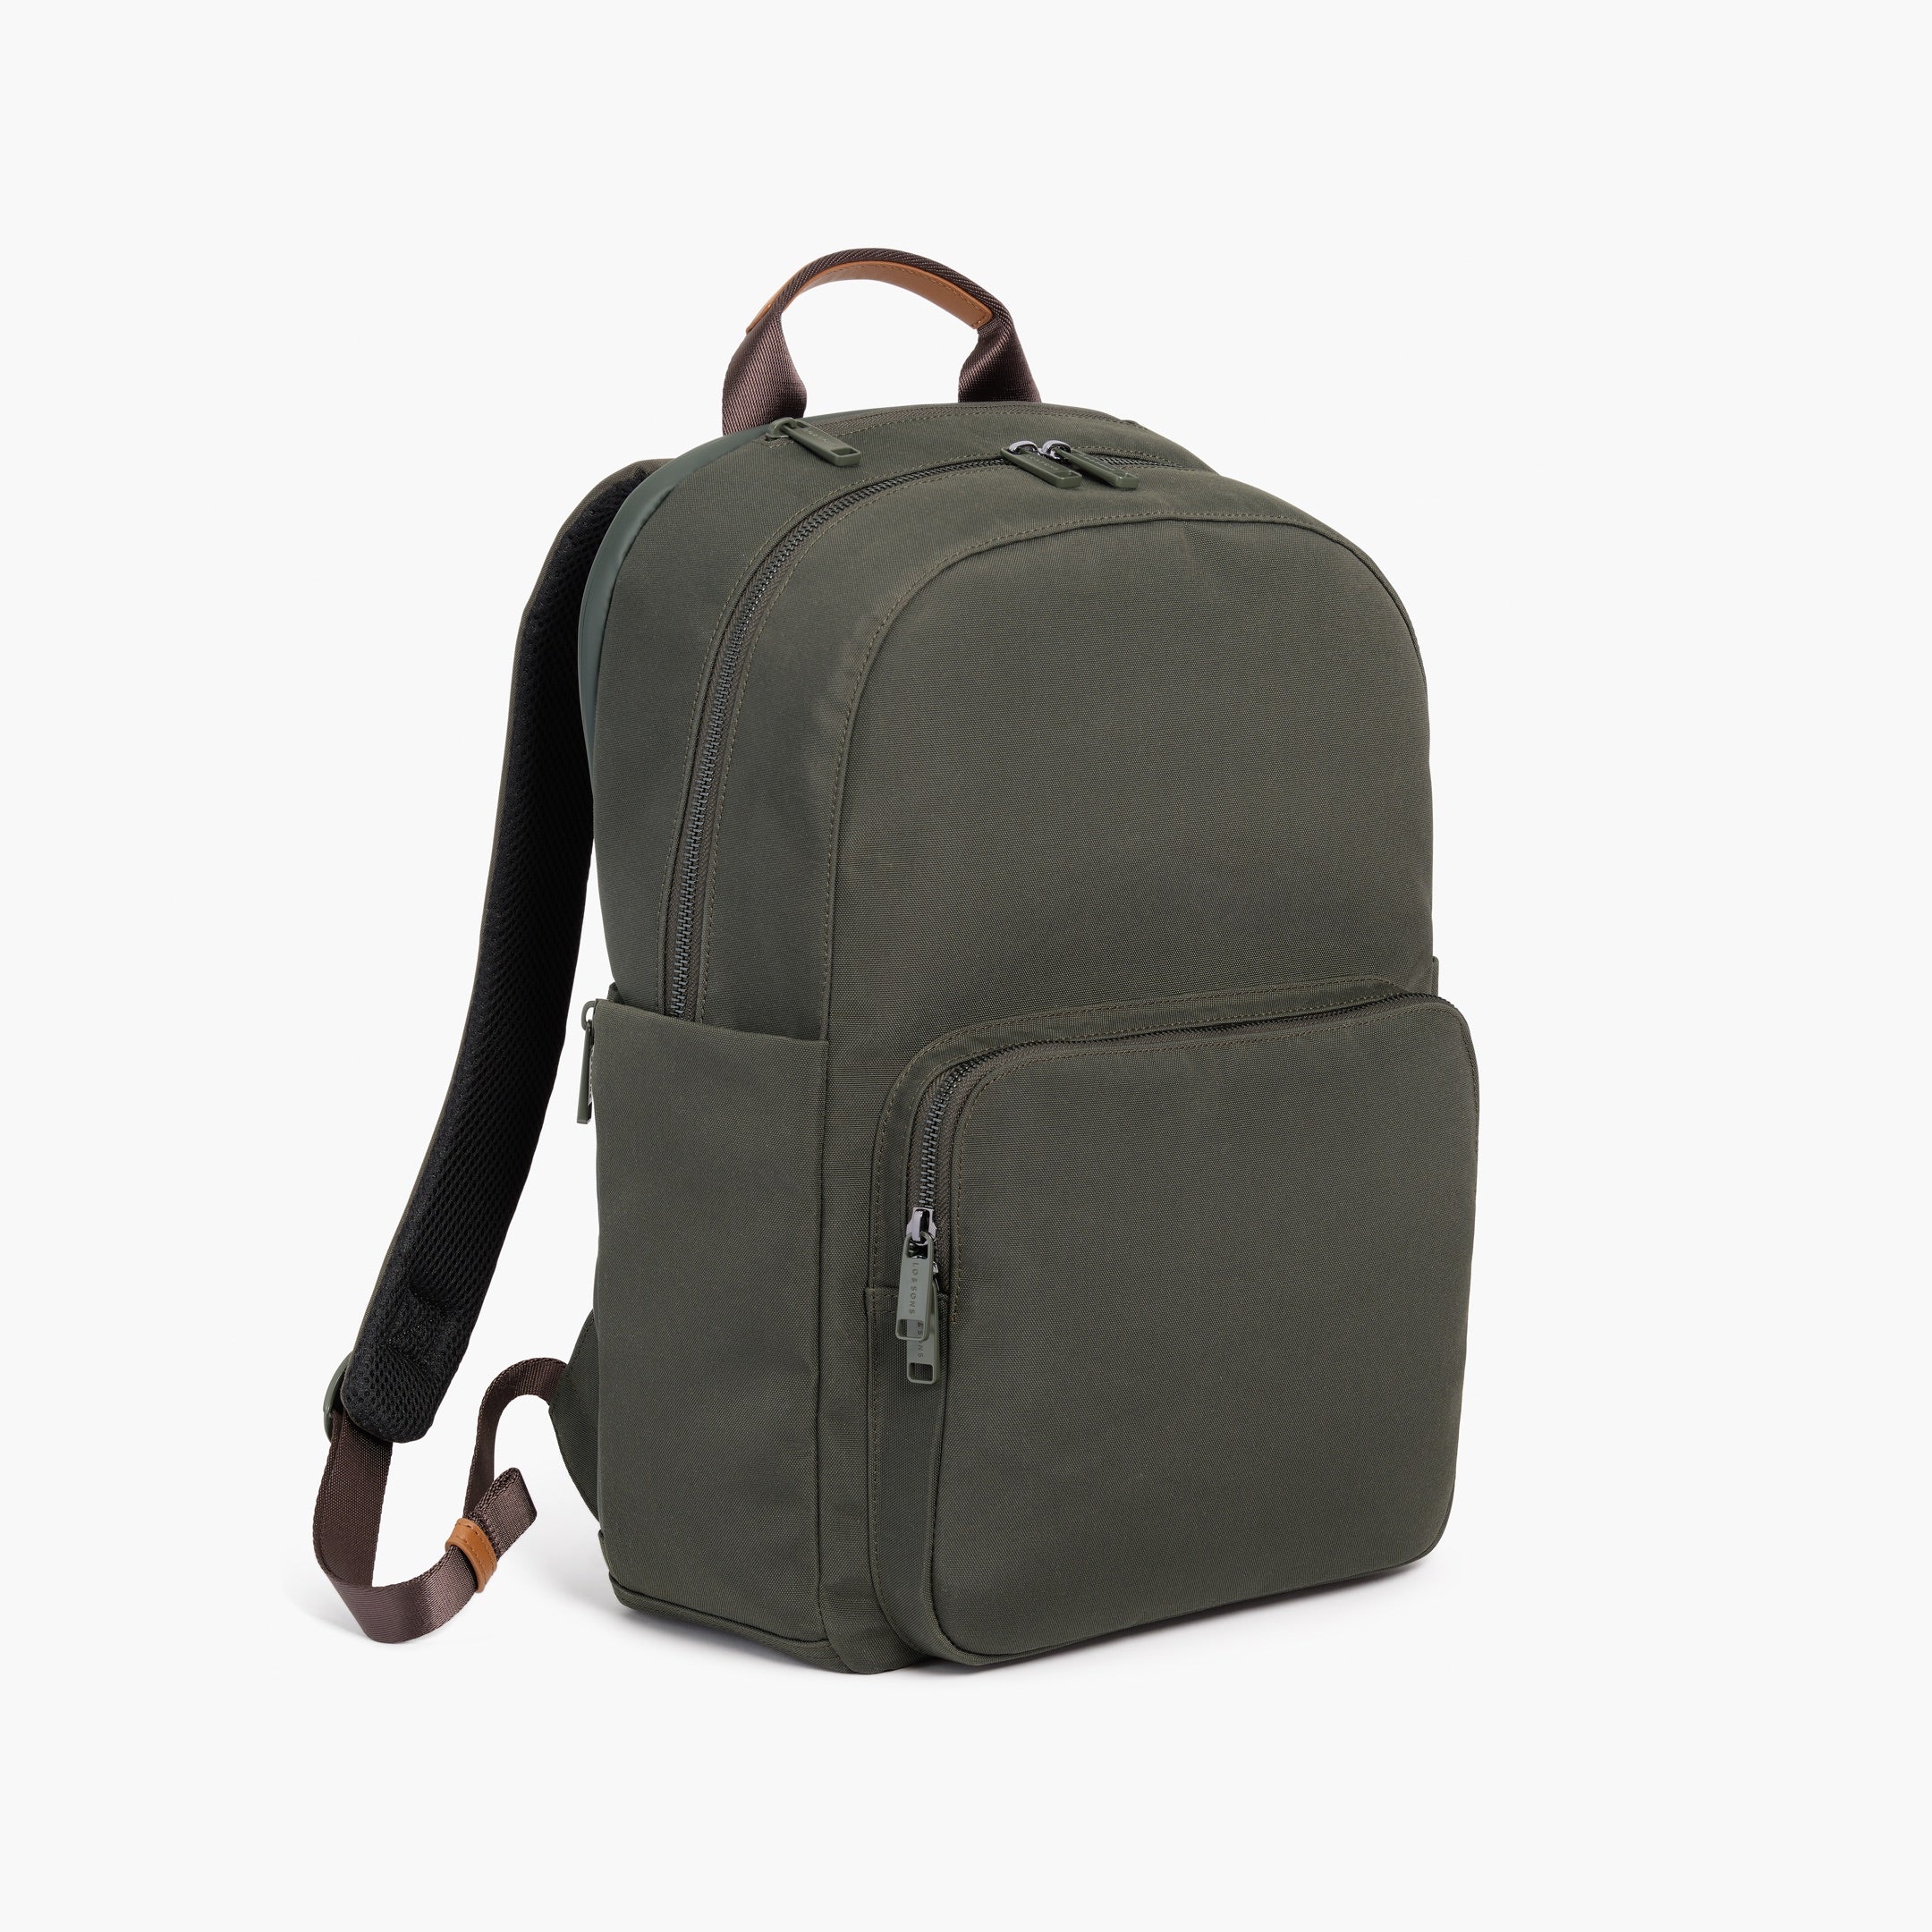 F Gear Unisex Olive Green Backpacks with Anti-Theft Feature Price in India,  Full Specifications & Offers | DTashion.com